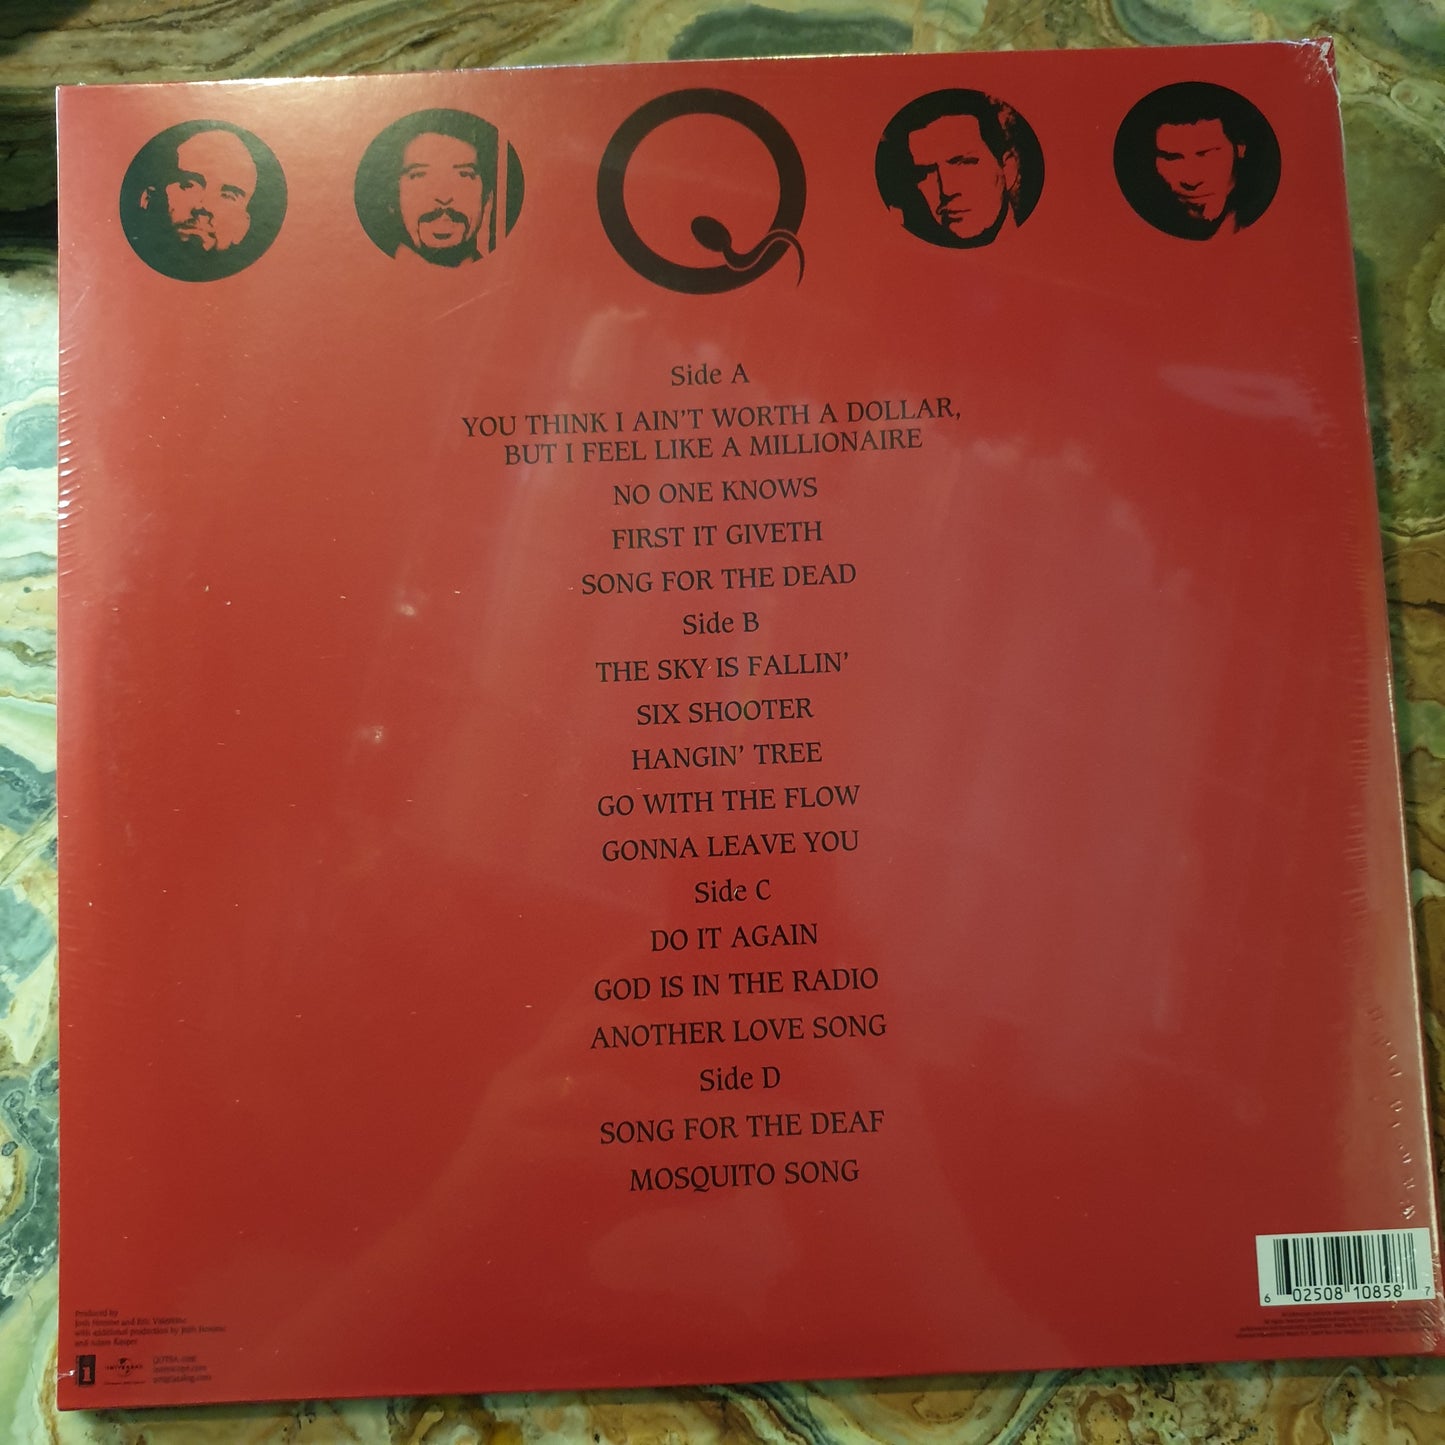 NEW - Queens of the Stone Age, Songs for the Deaf 2LP